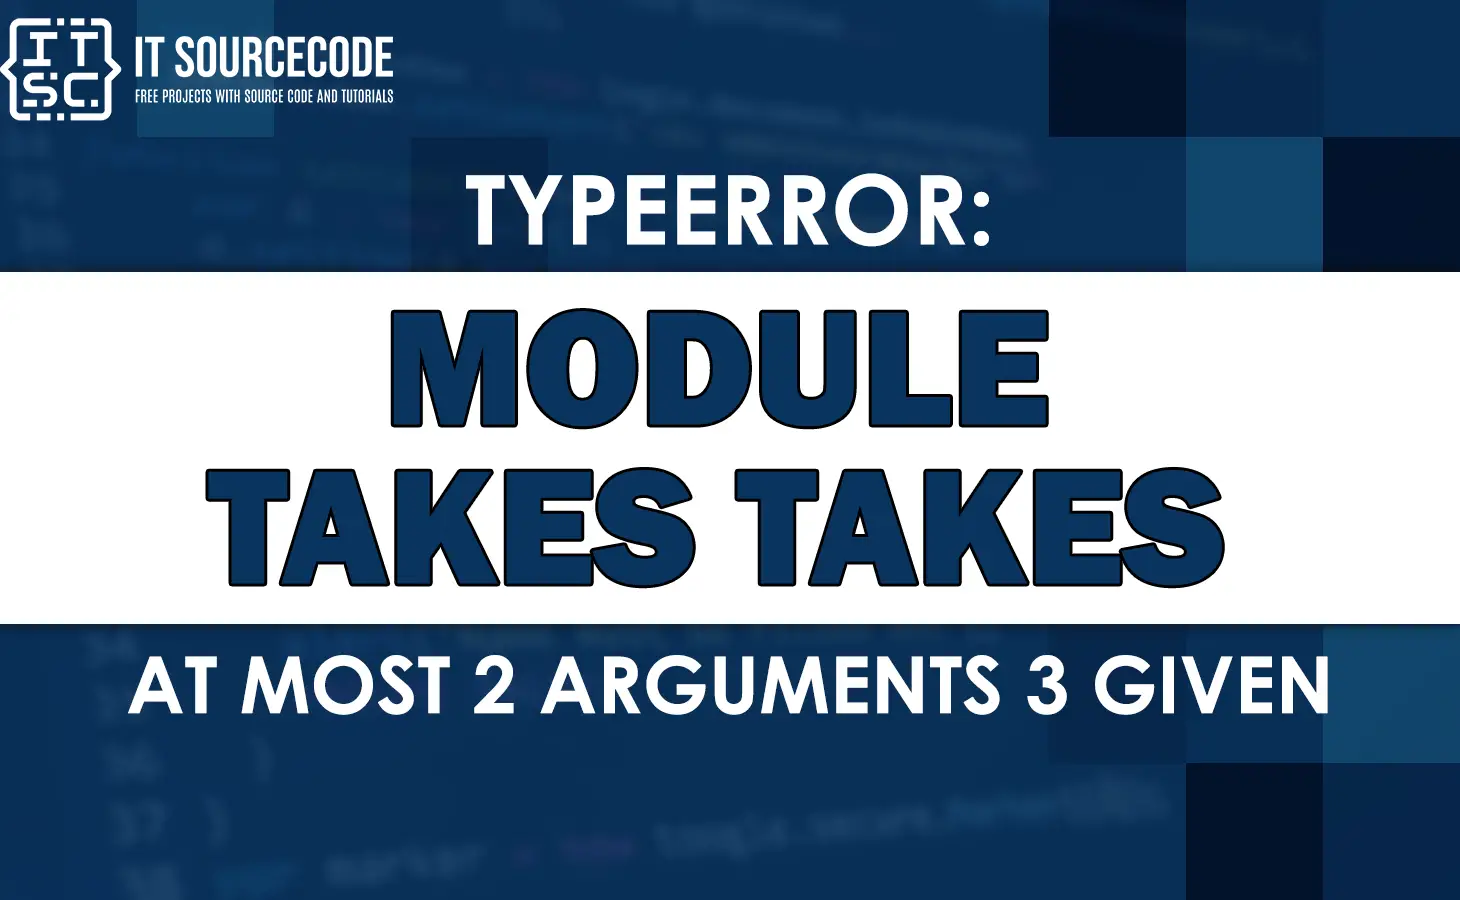 Typeerror module takes at most 2 arguments 3 given